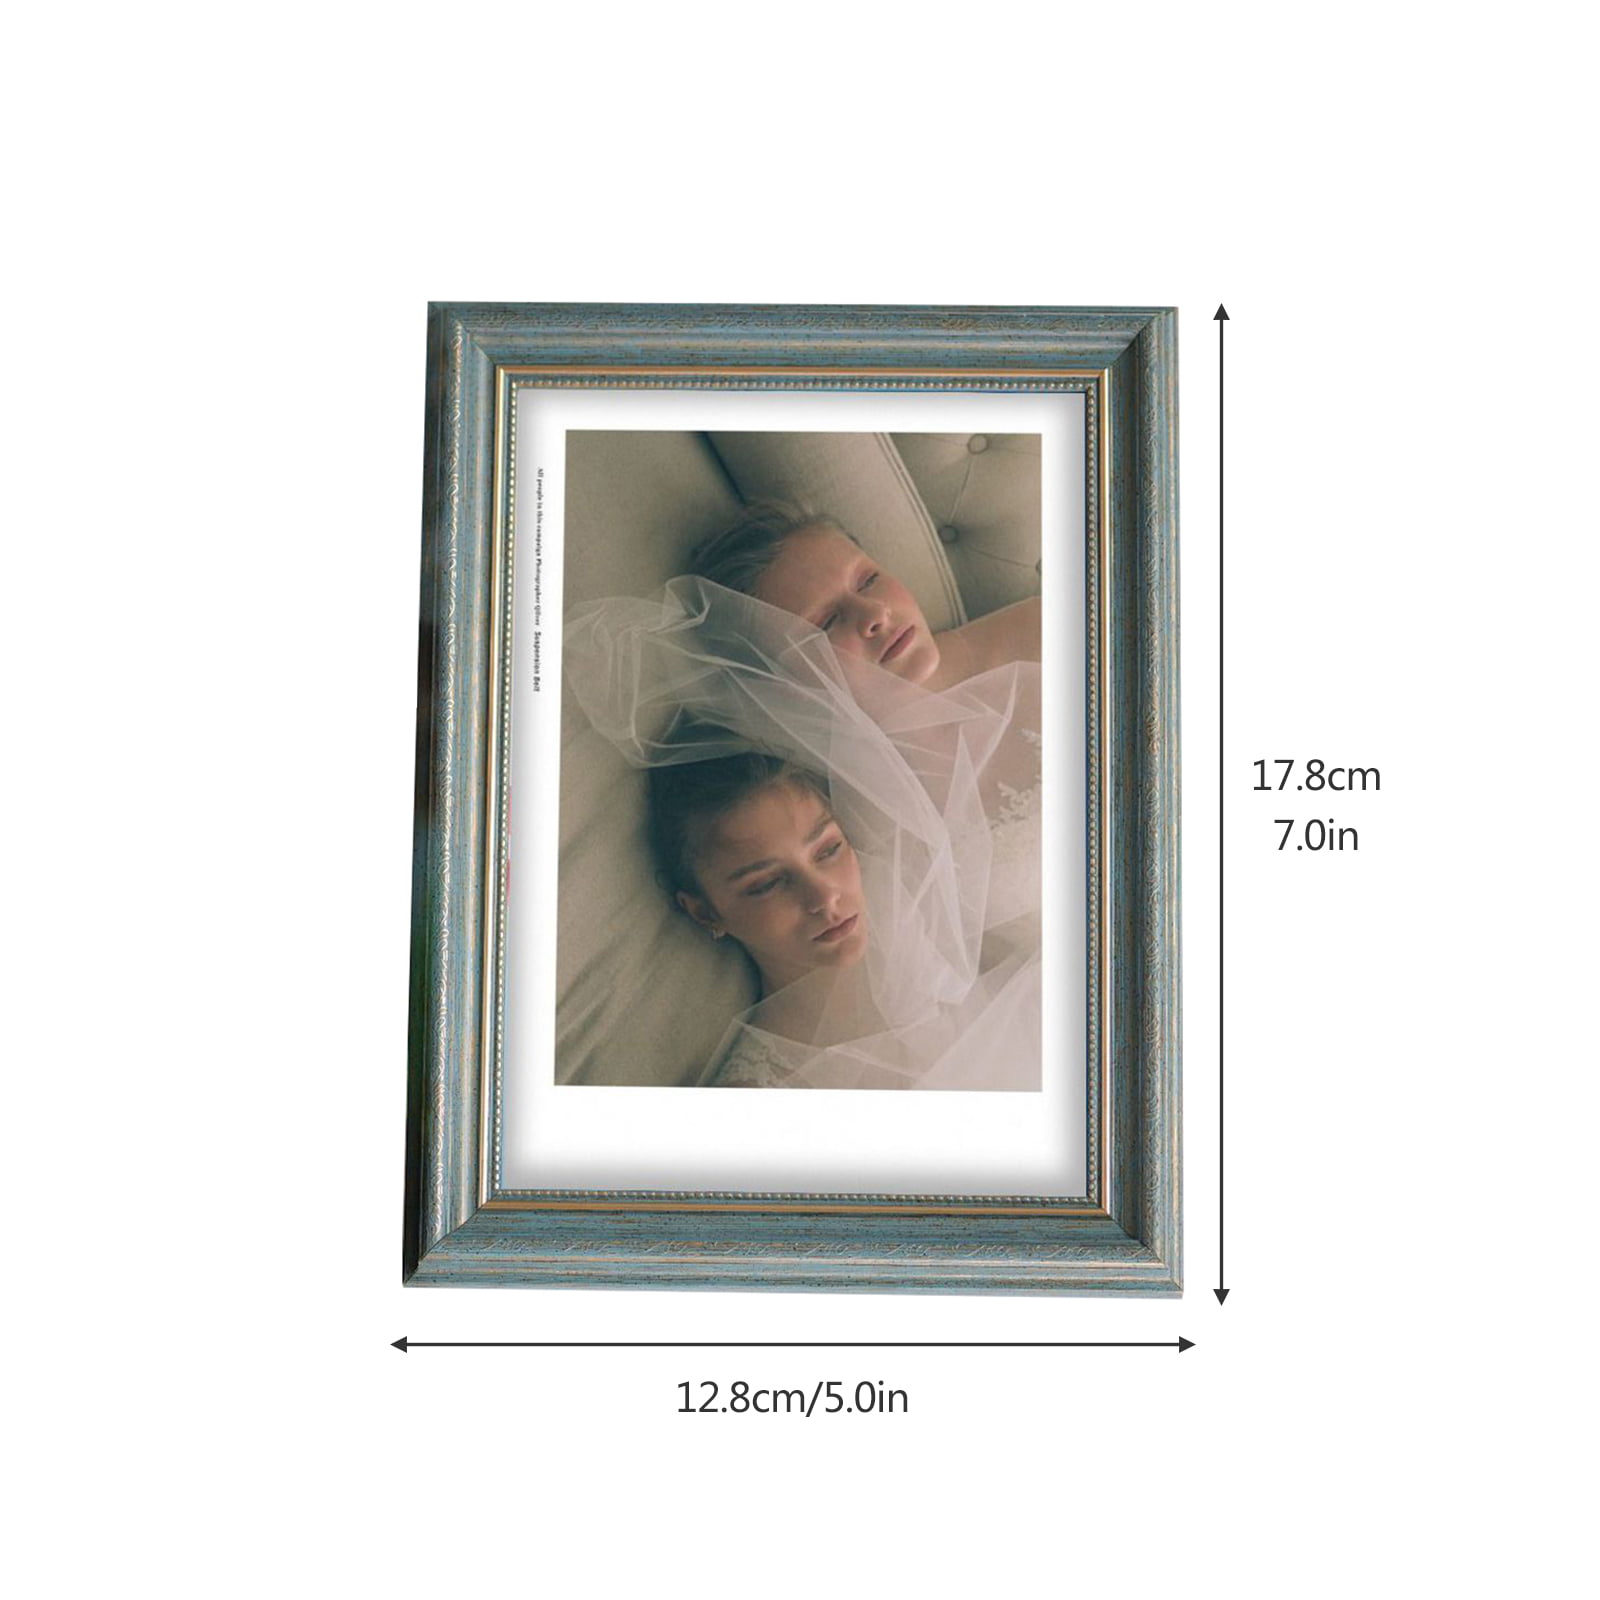 3.5x5 inch Picture Frame Made of Solid Wood High Definition Glass for Table Top Display and Wall Mounting Photo Frame Brown 